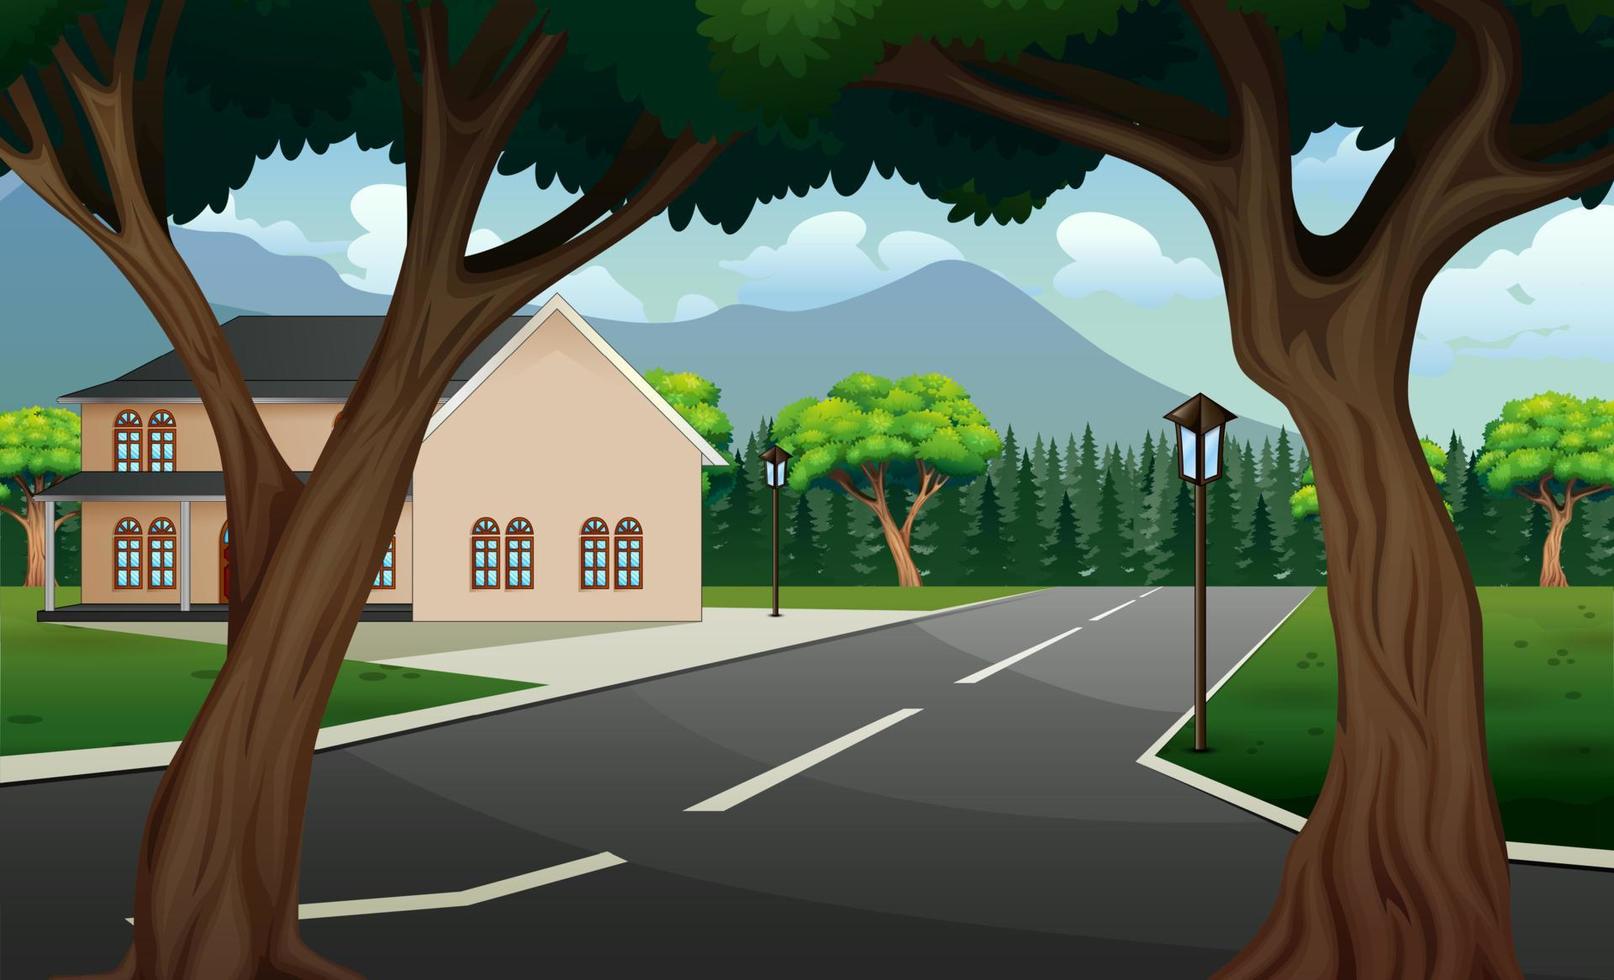 Street scene with building and nature background vector